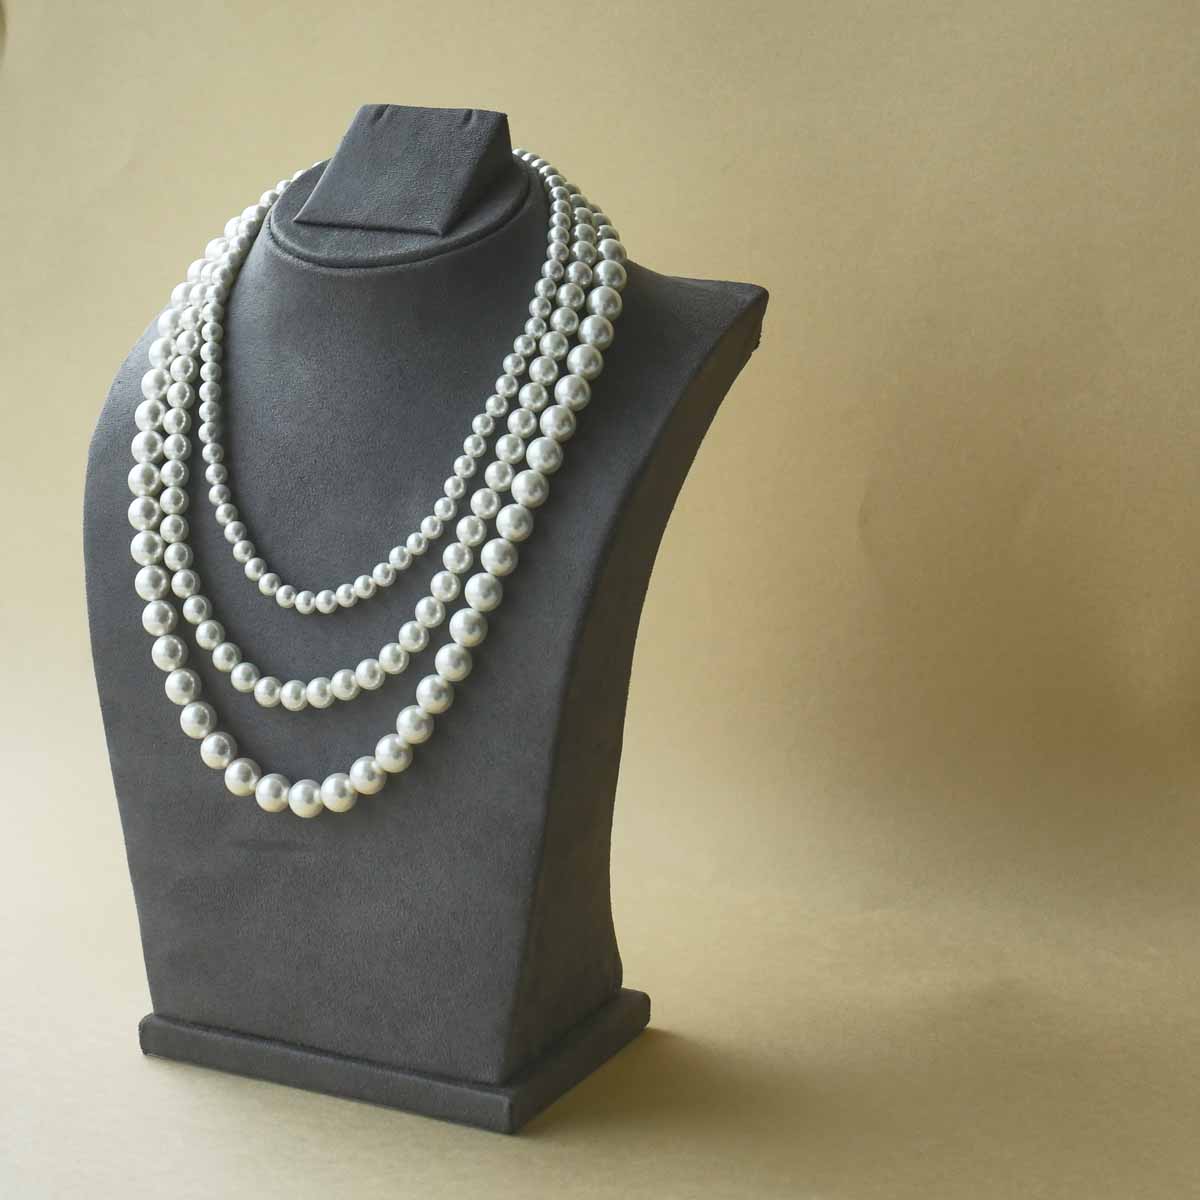 Classy Vintage Style Classy Layered Pearl Necklace - Mia Belle Girls